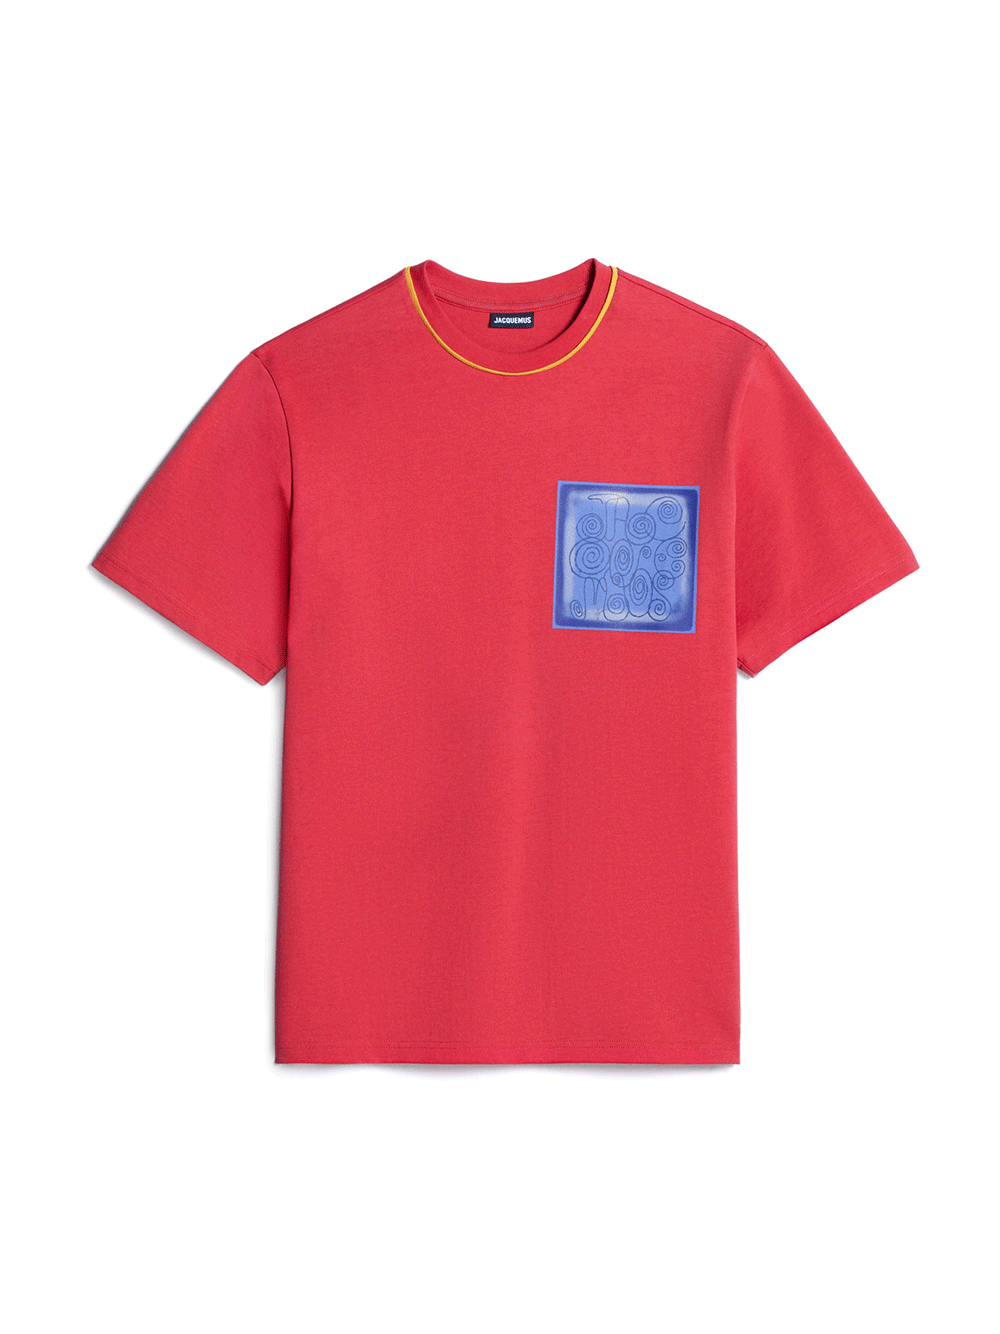 Jacquemus-Le-T-shirt-Duelo-Red-1